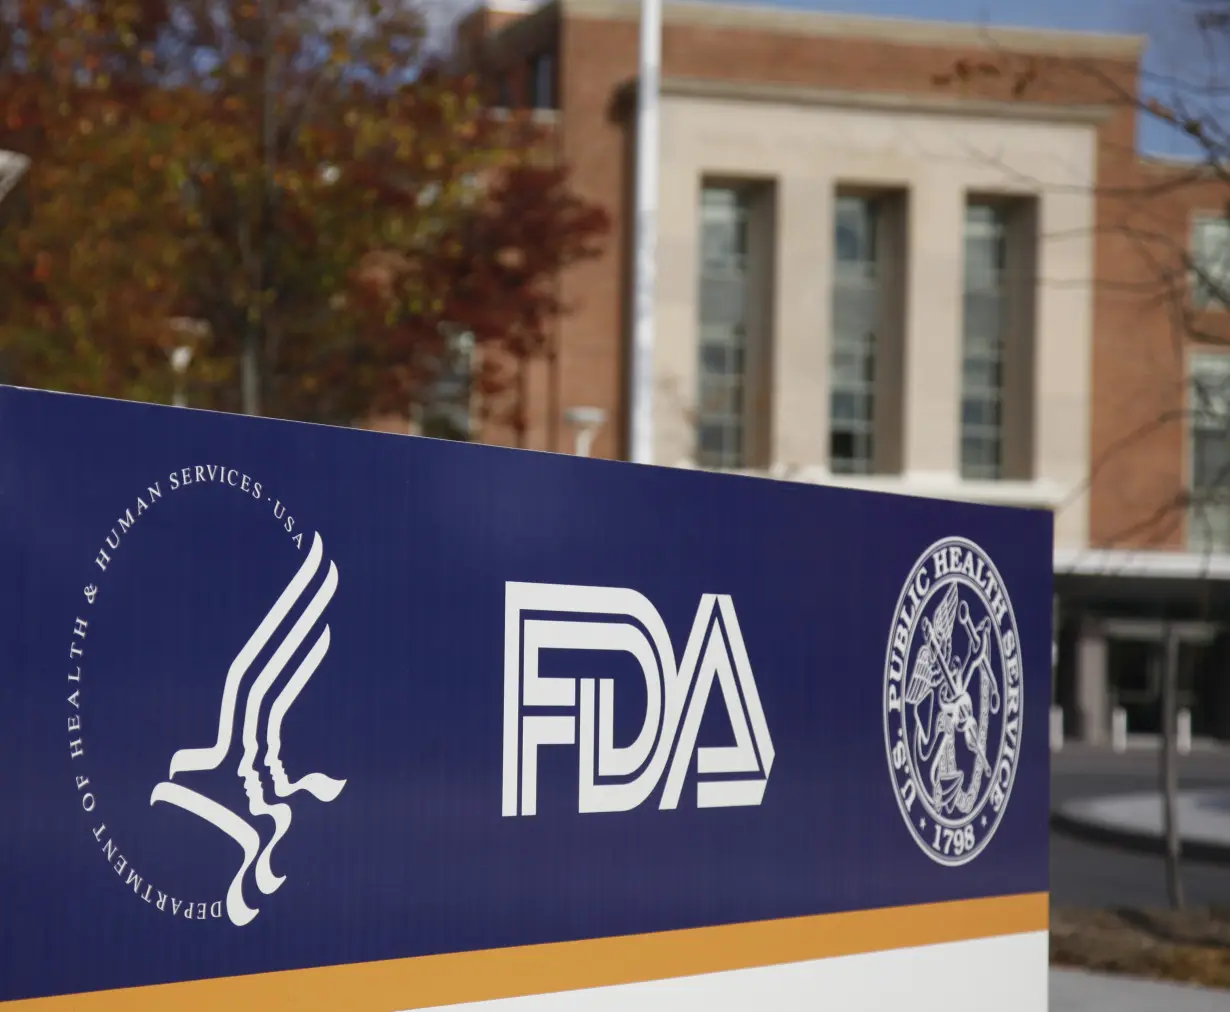 The headquarters of the U.S. Food and Drug Administration (FDA) is seen in Silver Spring, Maryland